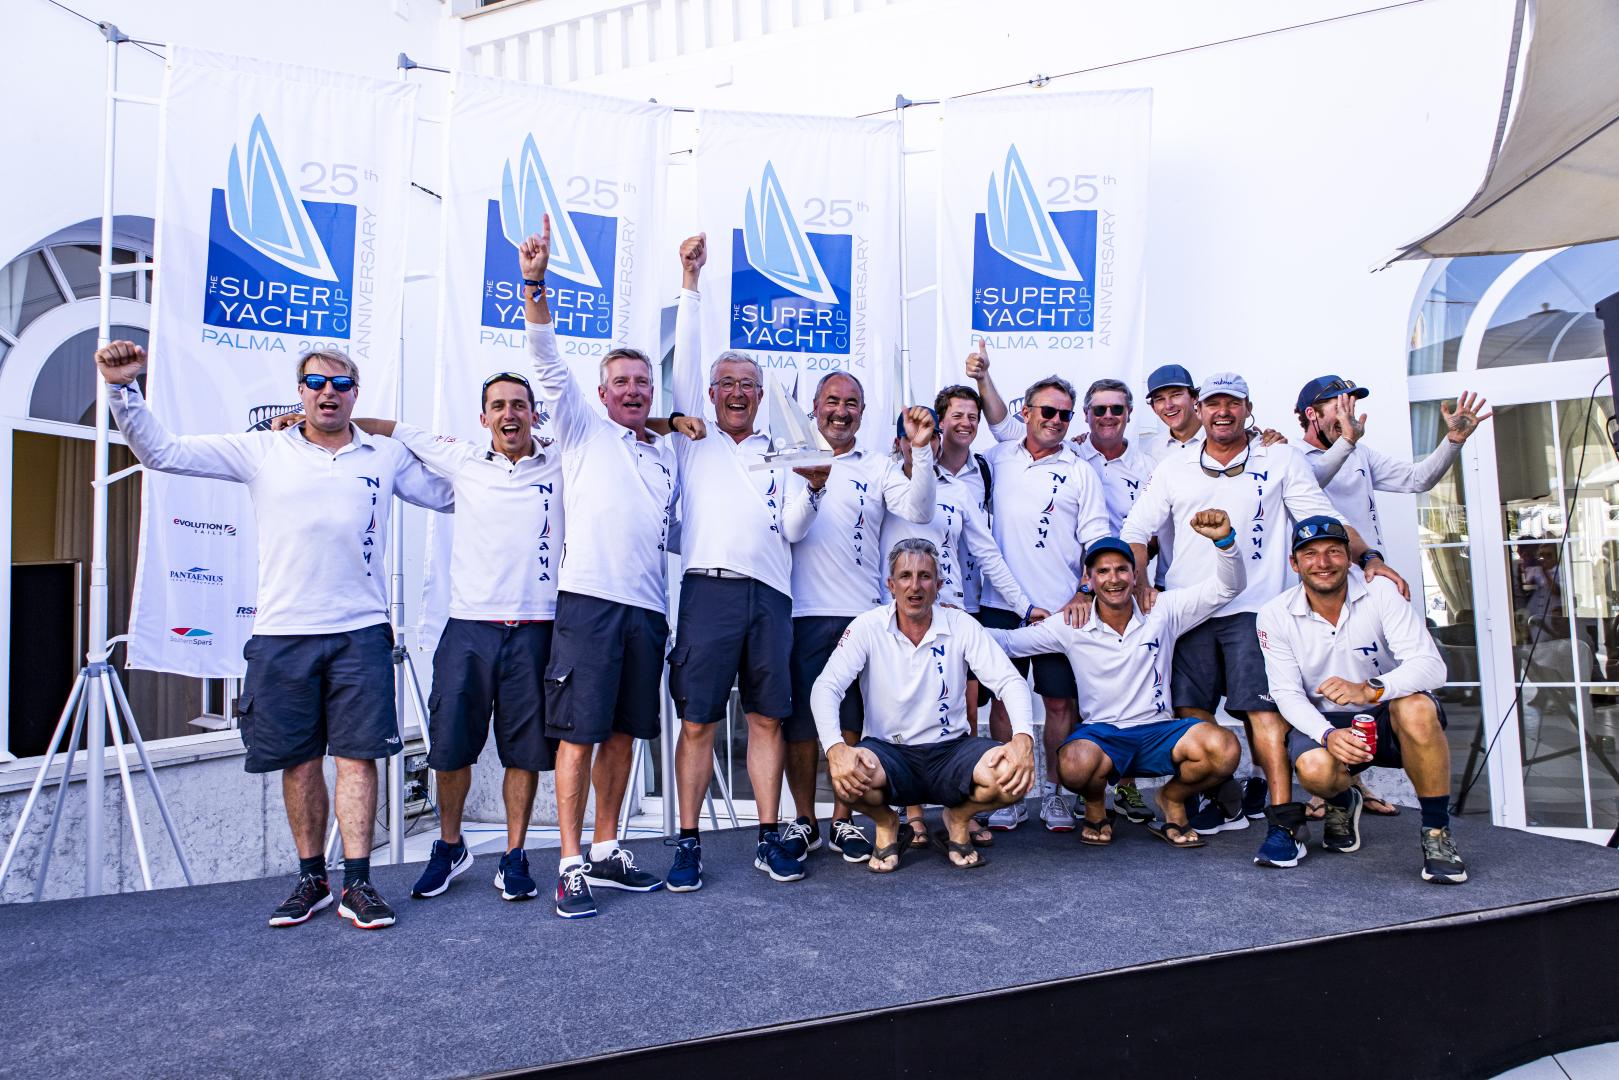 Ravenger wins Superyacht Cup Palma 25th anniversary event with a dramatic debut performance